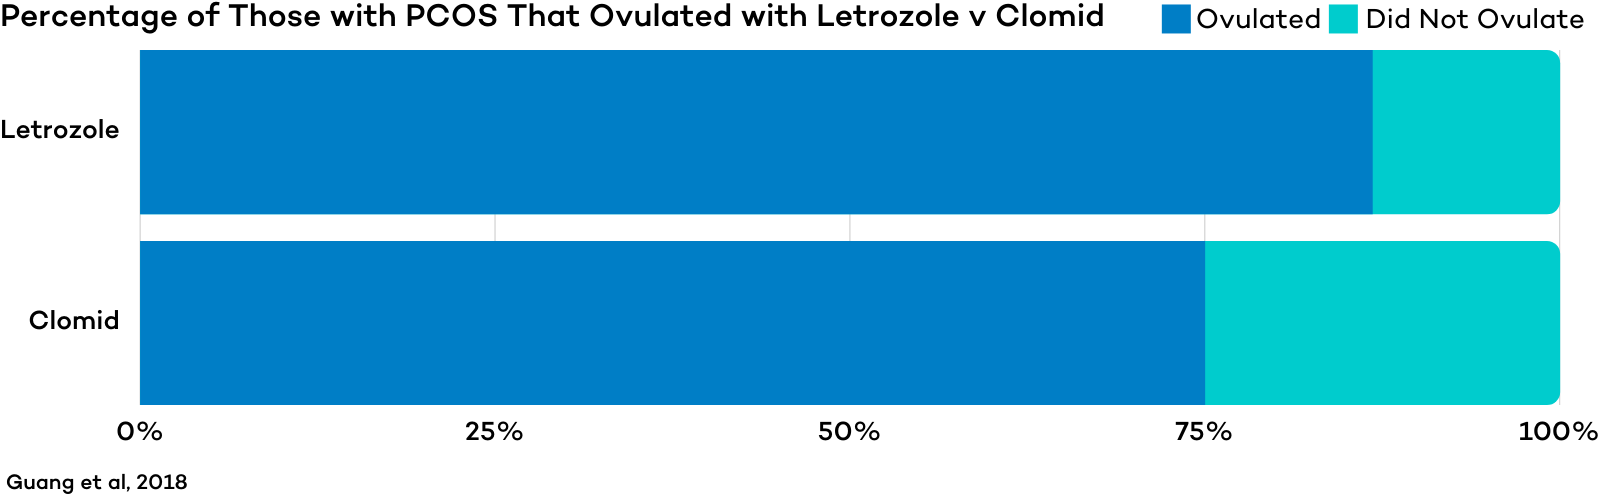 Percentage of Those with PCOS That Ovulated with Letrozole v Clomid